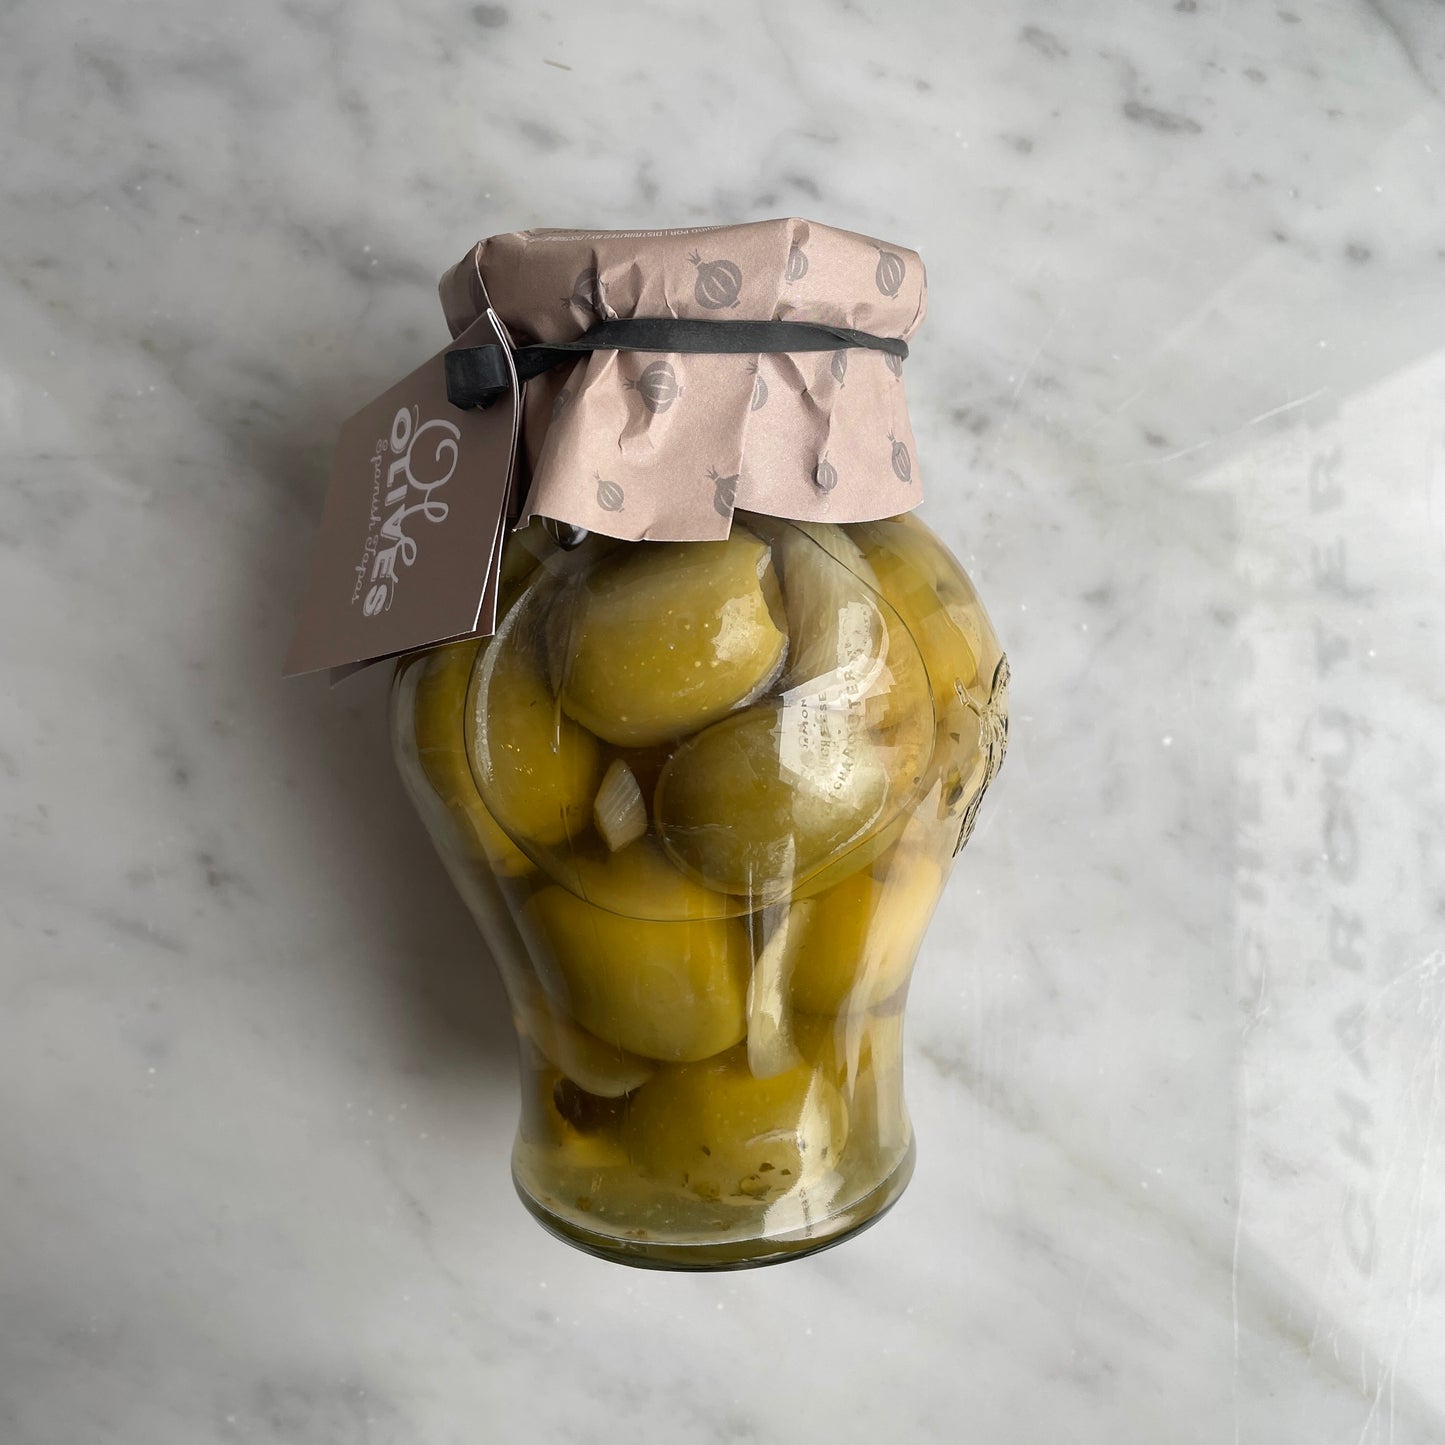 Gordal Olives with onion in amphora